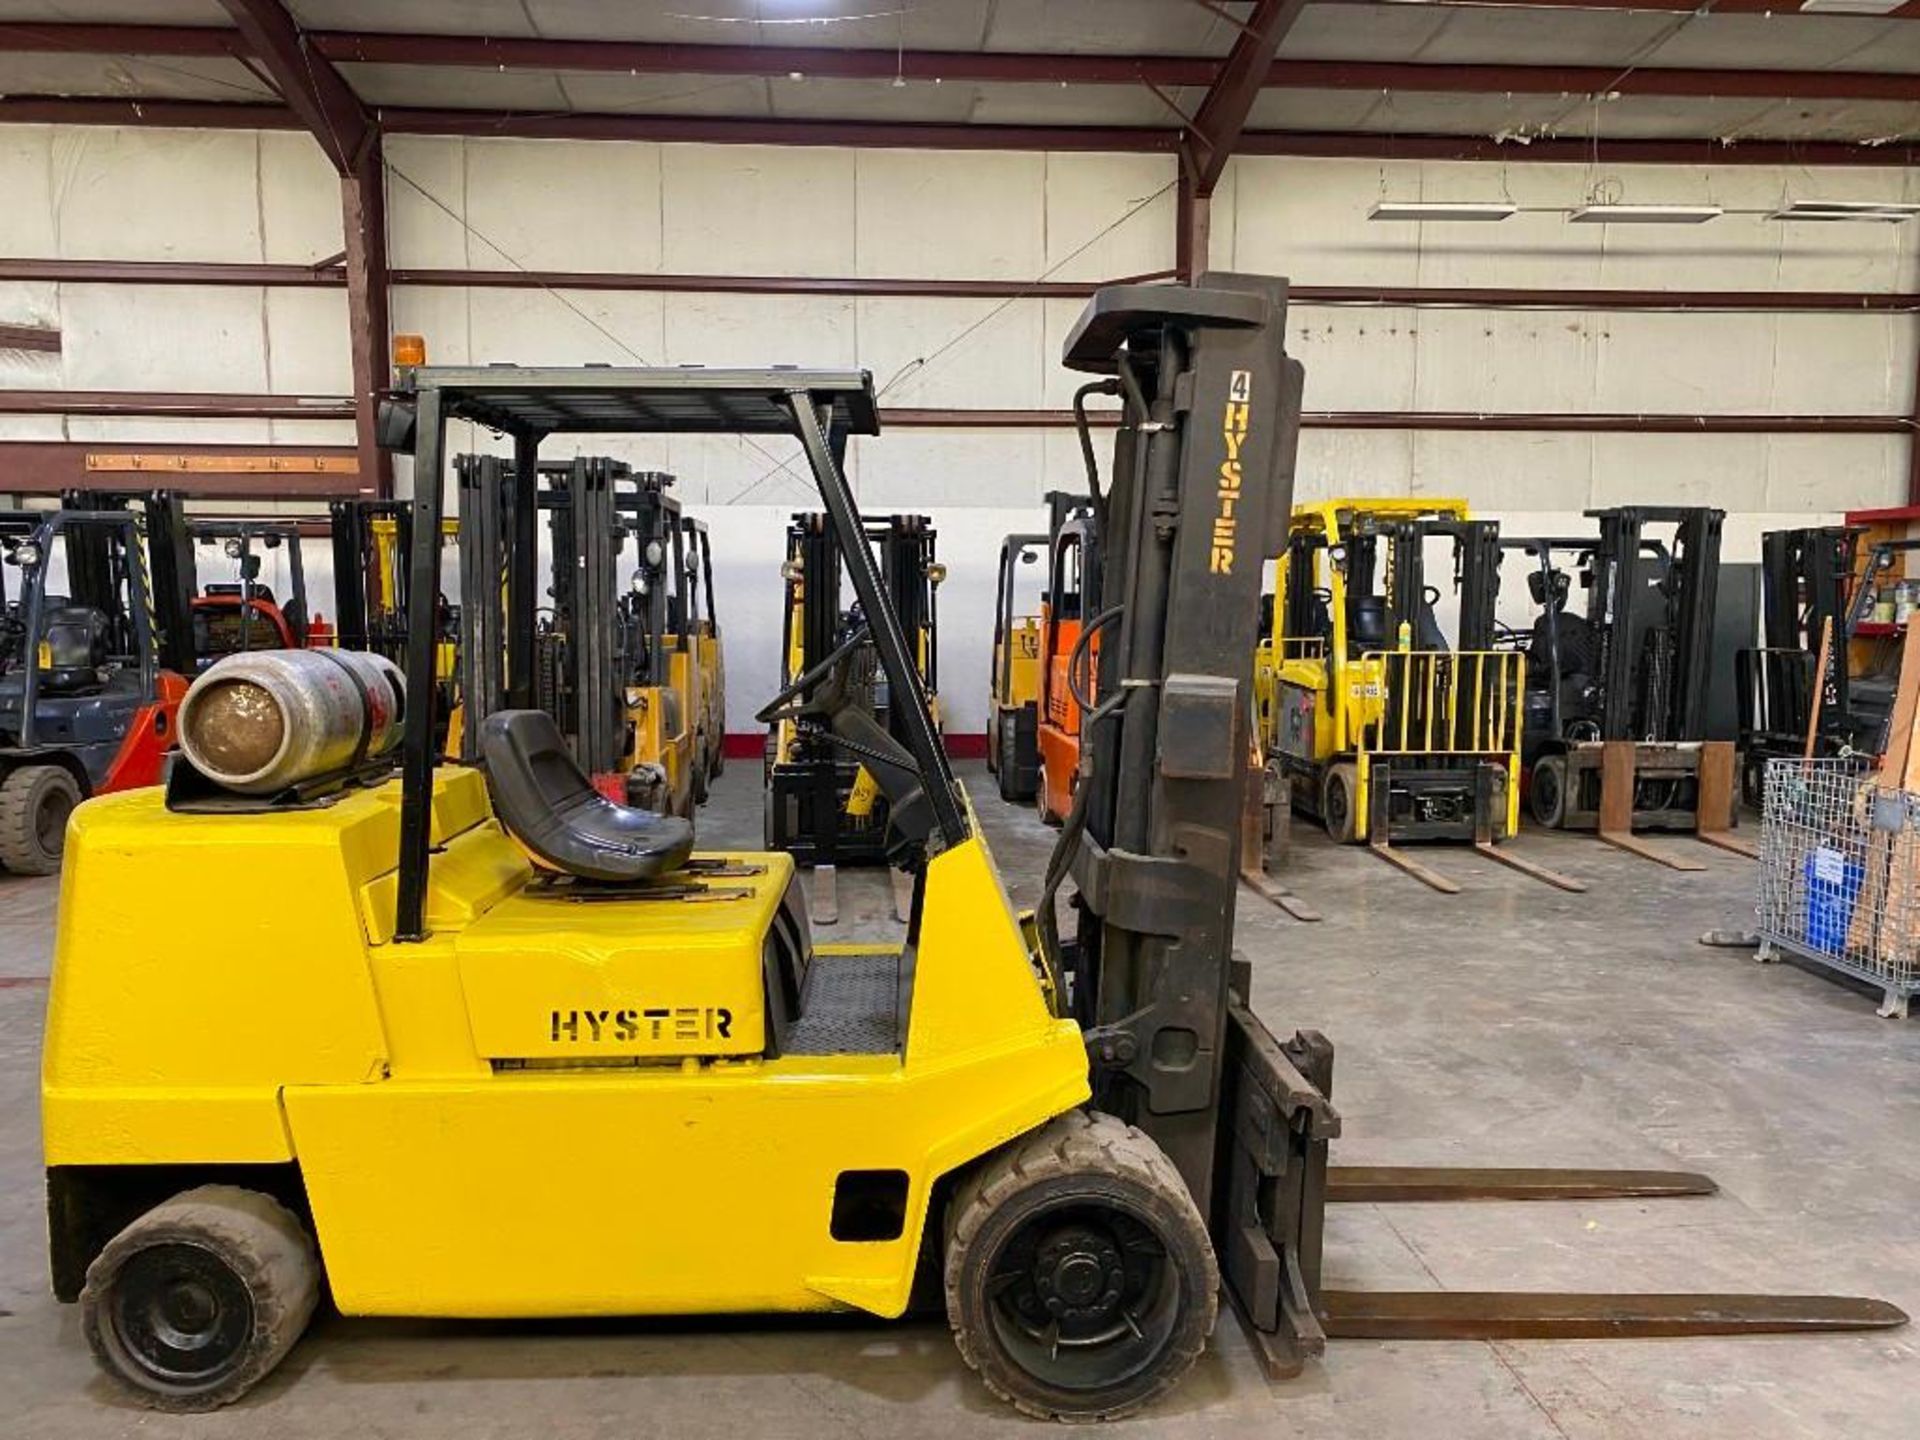 Hyster 10,000-LB. Capacity Forklift, Model S100XL2, S/N D004D09664X, LPG, Treaded Tires, 3-Stage Mas - Image 3 of 5